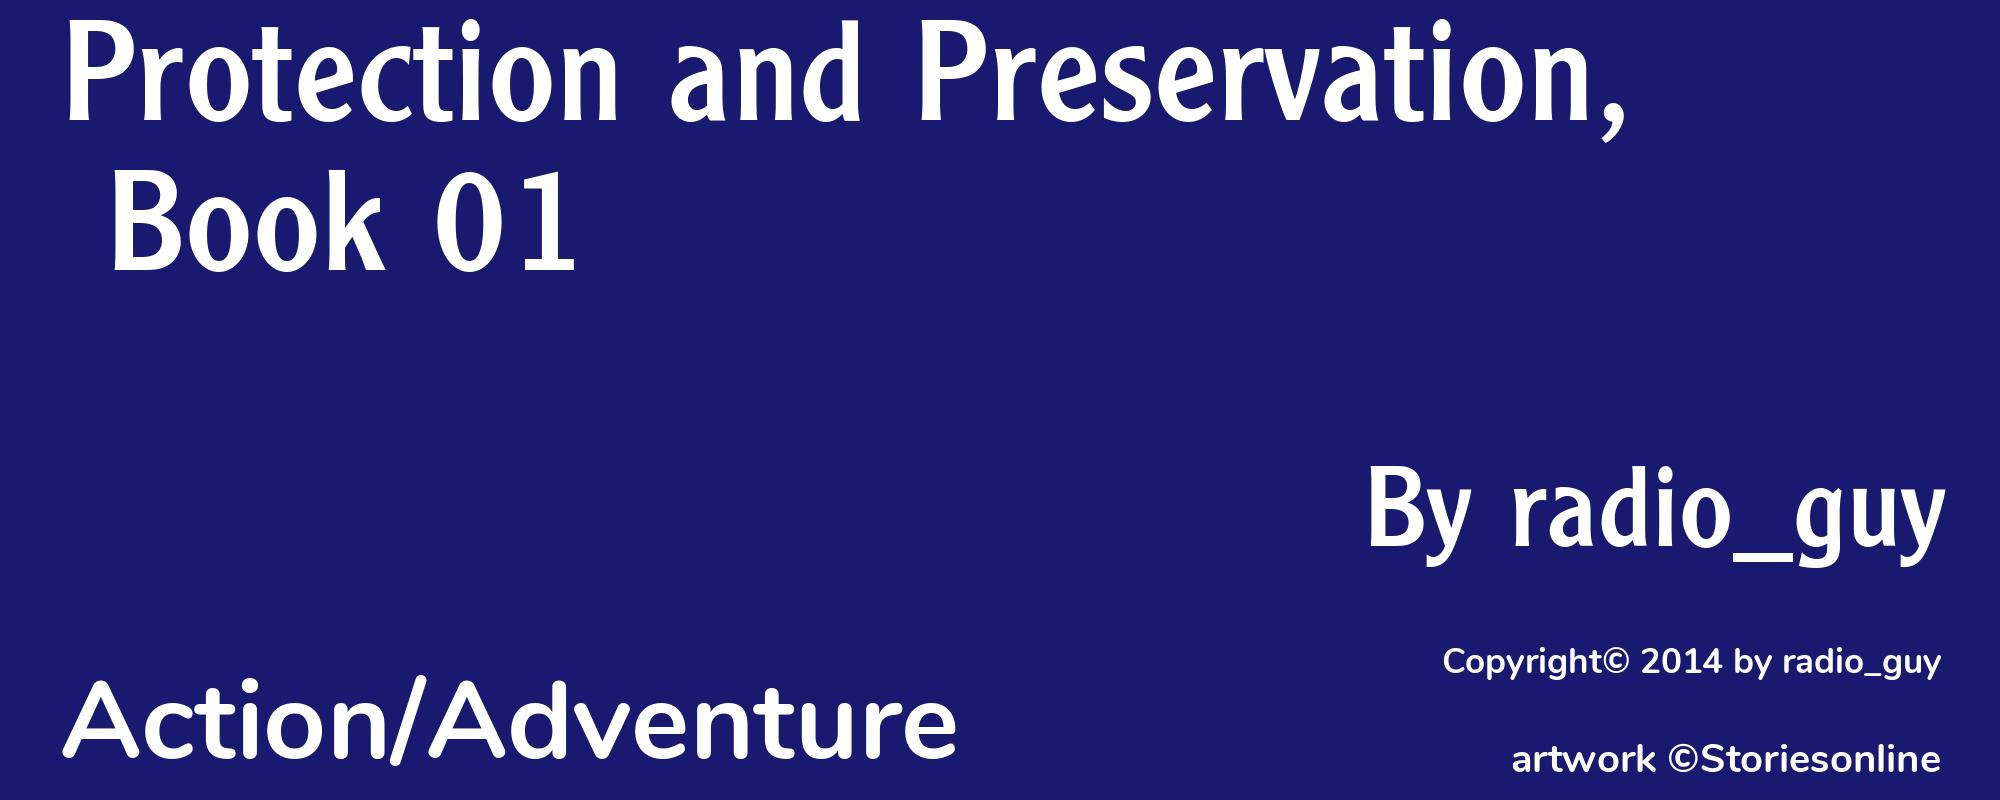 Protection and Preservation, Book 01 - Cover